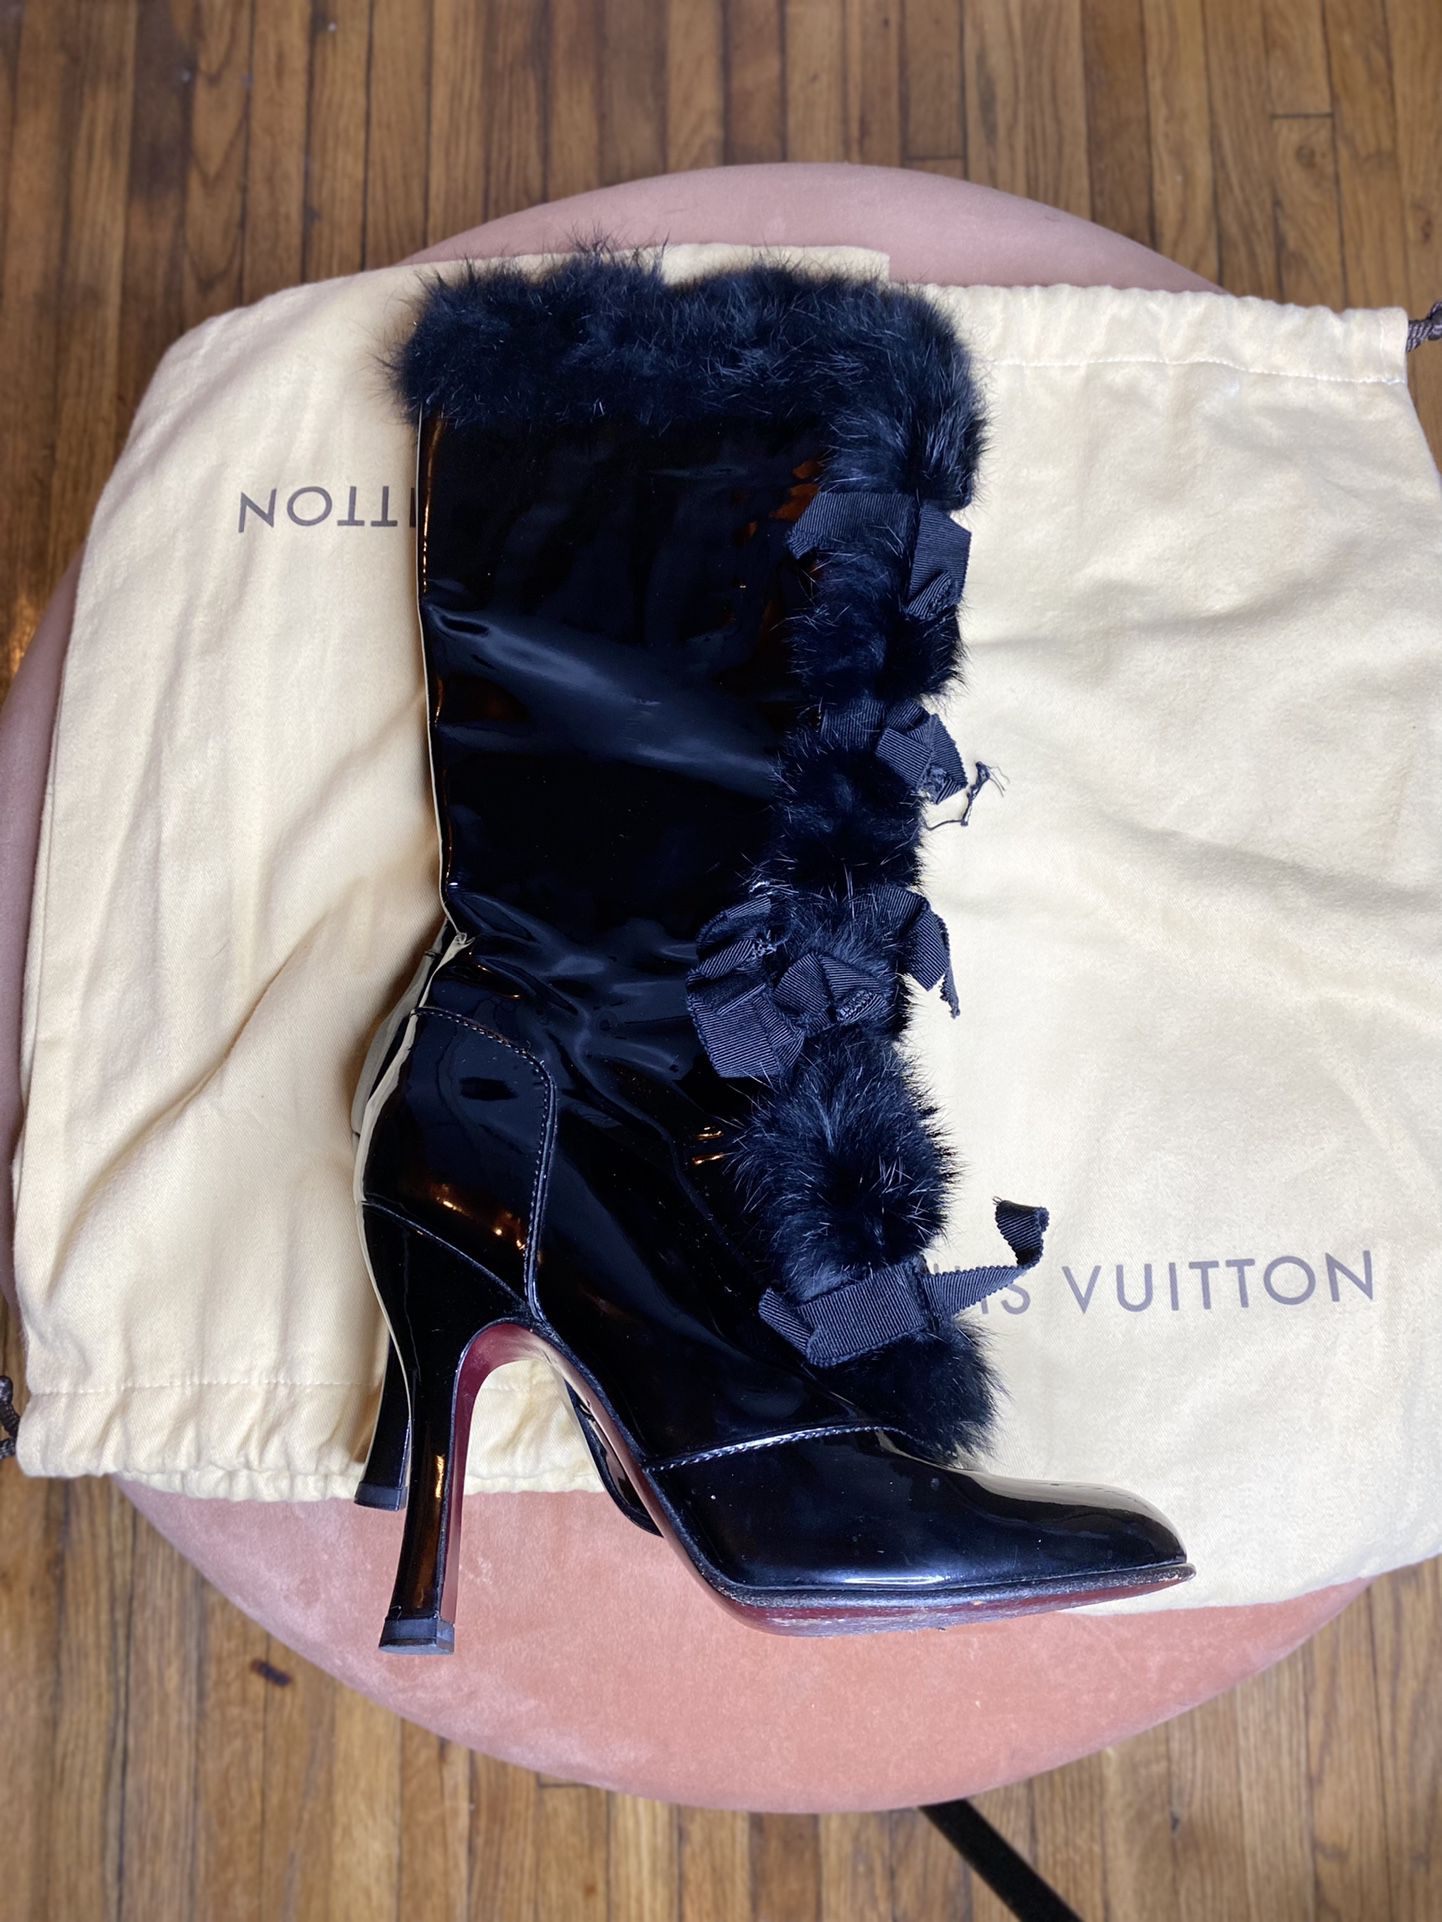 LouisVuitton Fox Fur Patent Leather Boots Worn Once for Sale in Brooklyn,  NY - OfferUp